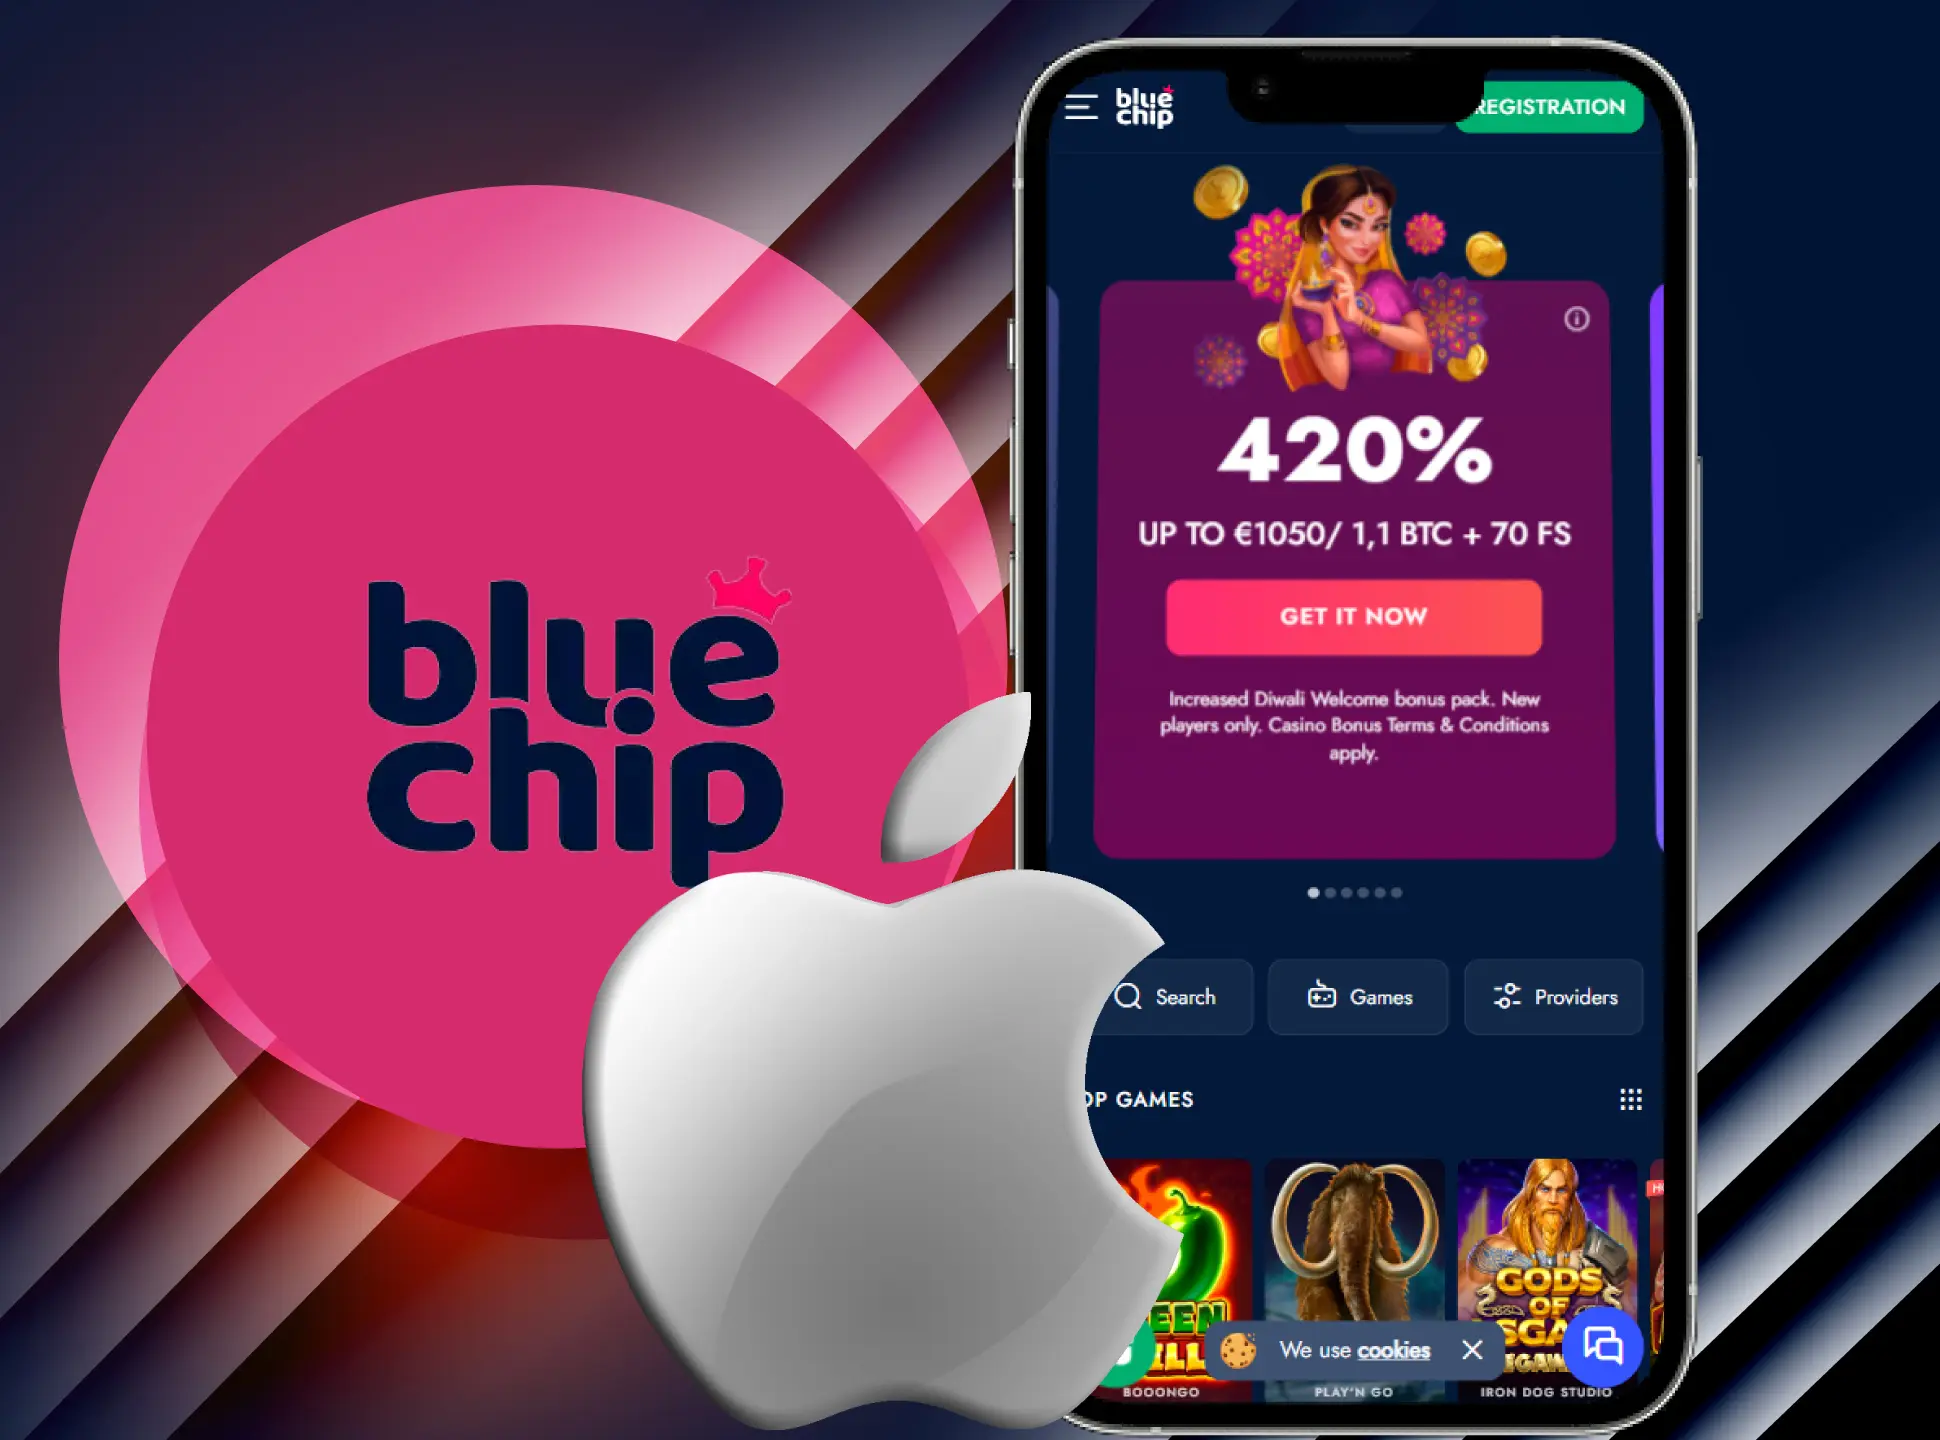 Open the Bluechip website on your iPhone.